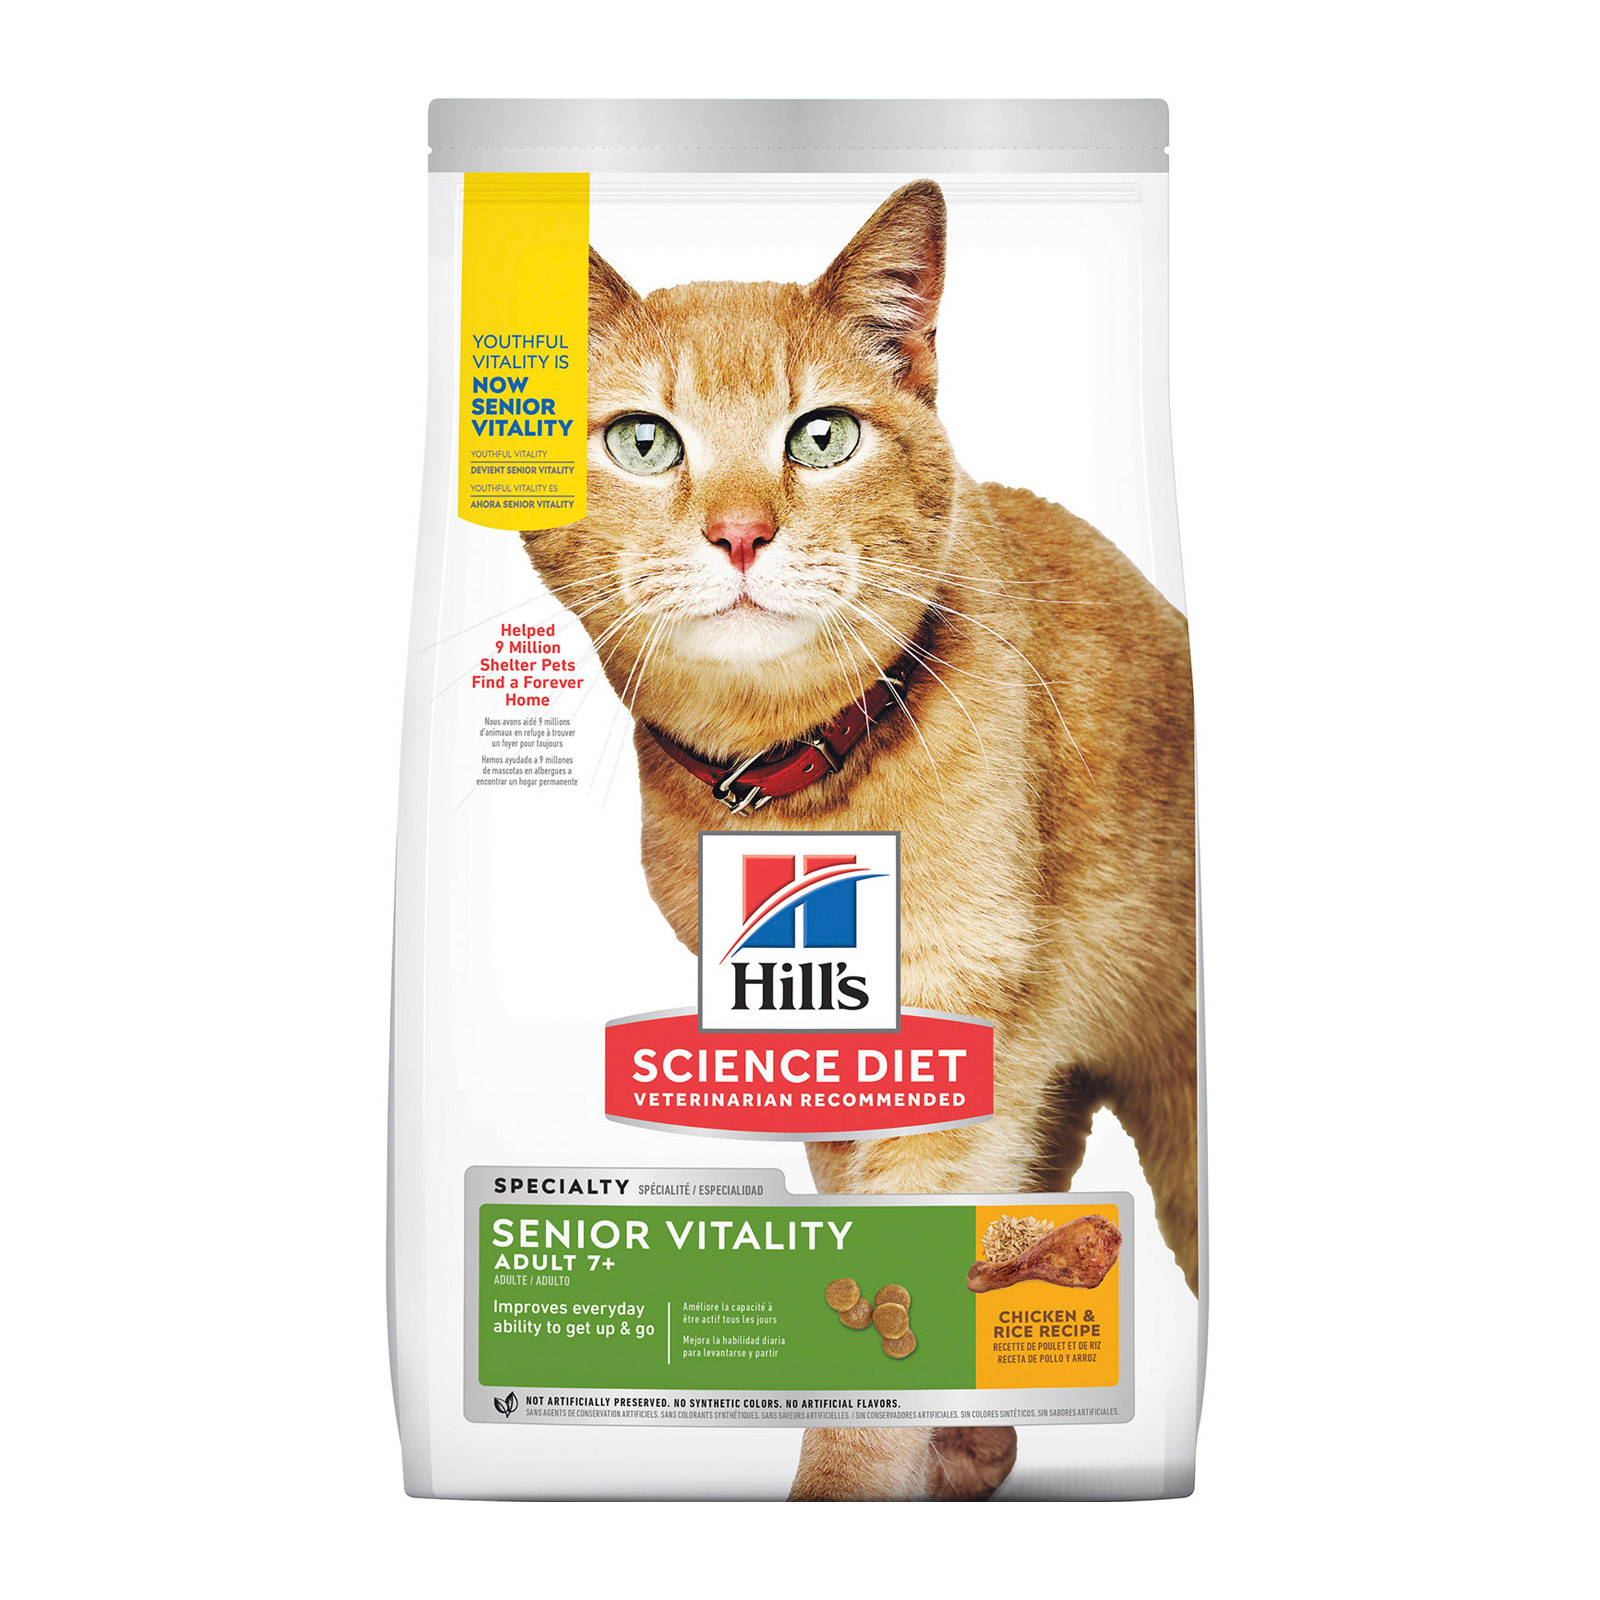 Hill's Science Diet Adult 7+ Youthful Vitality Chicken & Rice Senior Dry Cat Food for Food